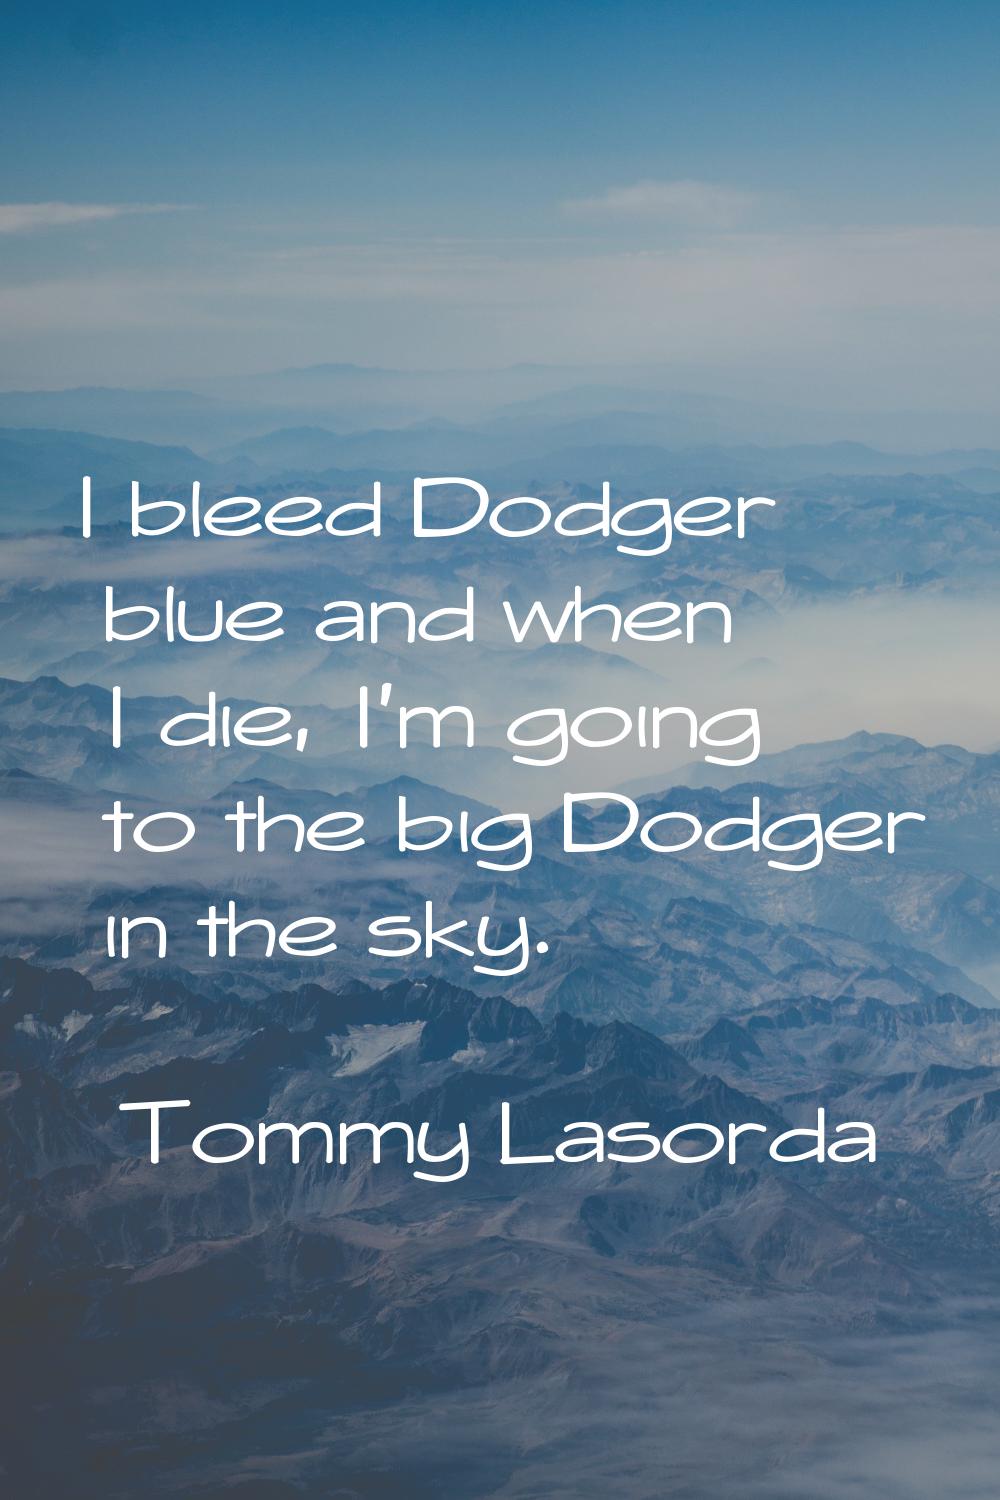 I bleed Dodger blue and when I die, I'm going to the big Dodger in the sky.